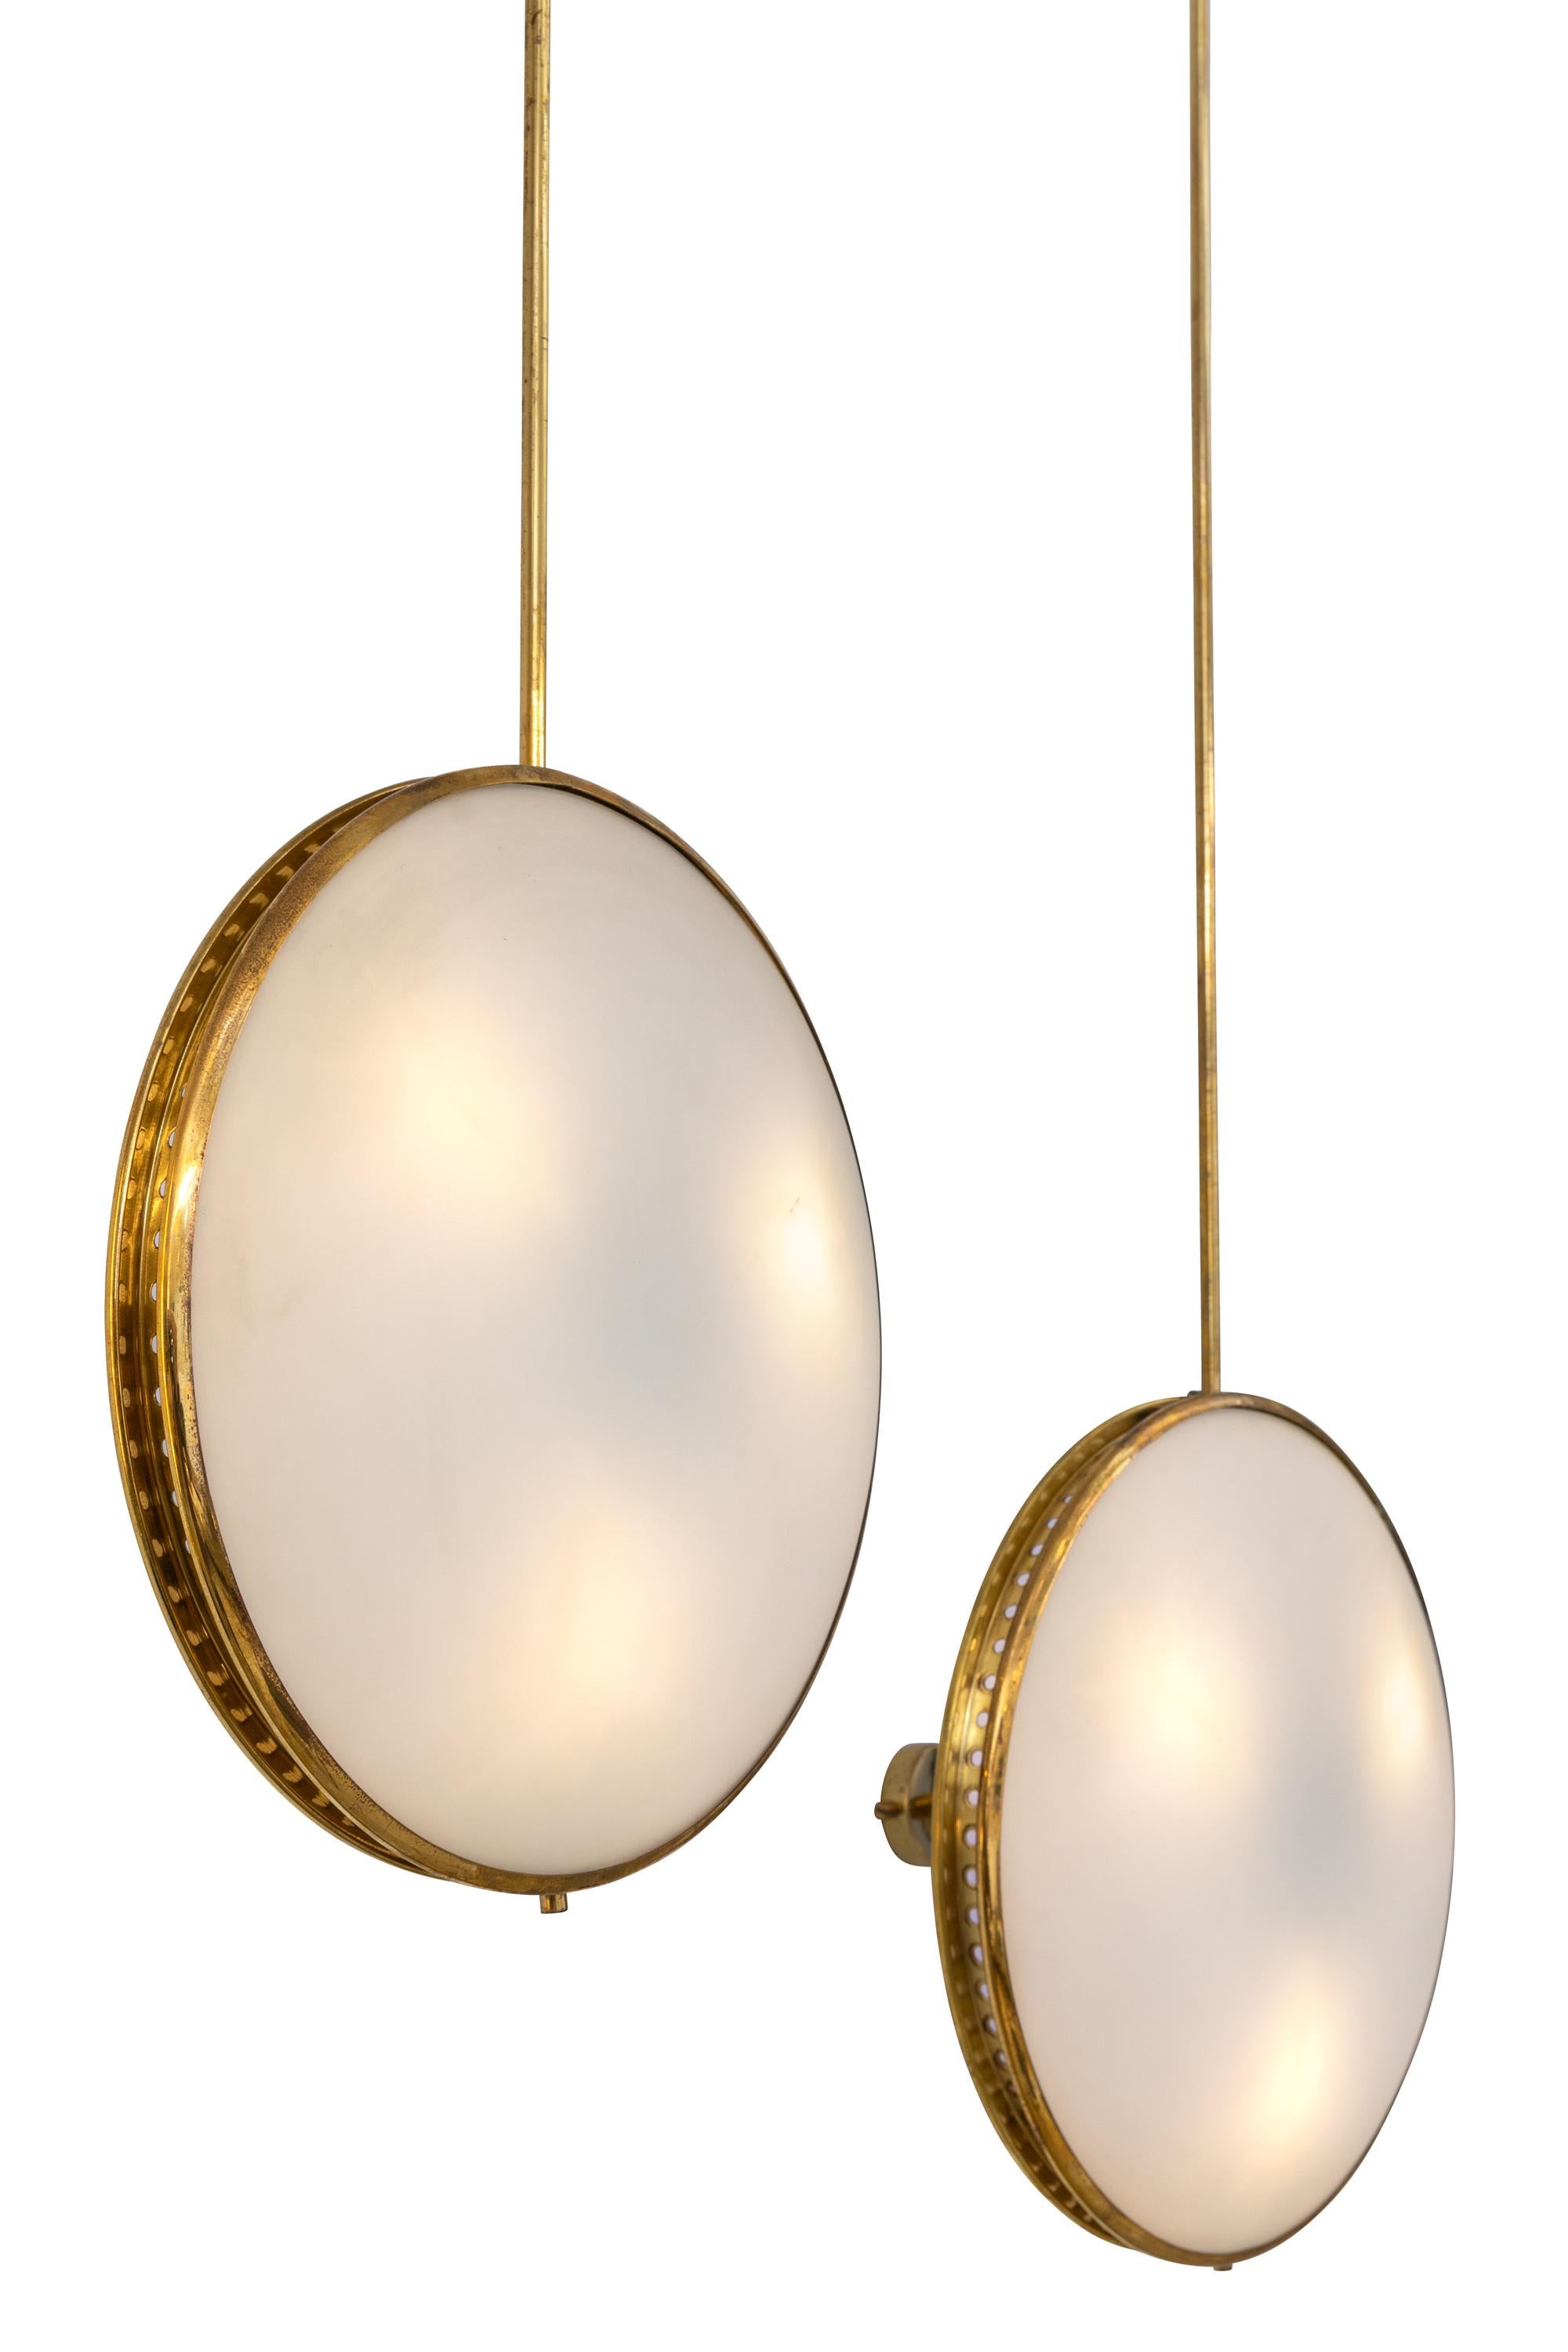 Italian Max Ingrand Ceiling Mounted Wall Lights for Fontana Arte, Italy 1959 For Sale